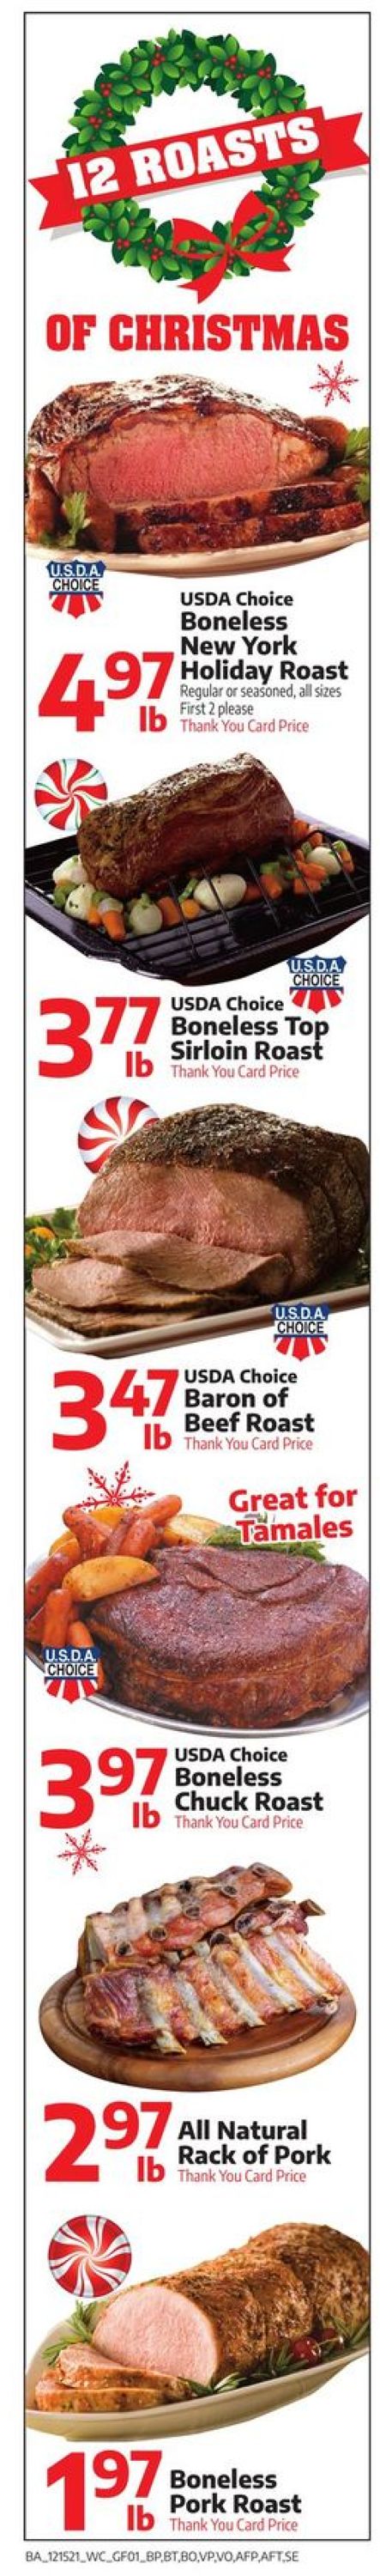 Bashas Ad from 12/15/2021